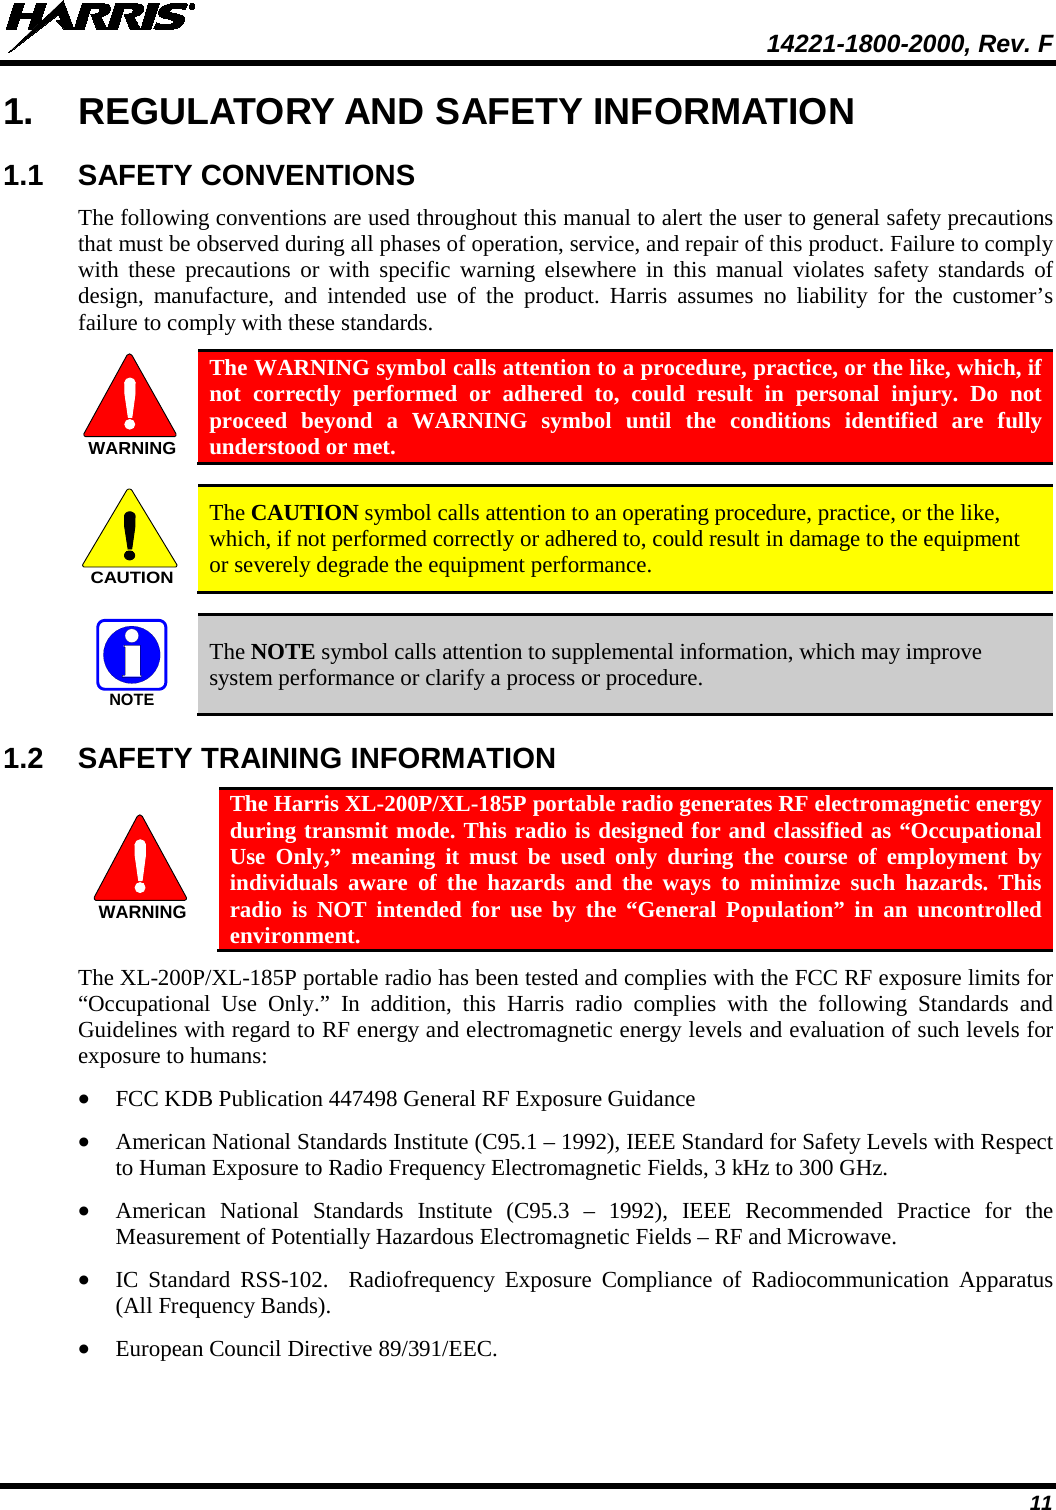  14221-1800-2000, Rev. F 11 1. REGULATORY AND SAFETY INFORMATION 1.1 SAFETY CONVENTIONS The following conventions are used throughout this manual to alert the user to general safety precautions that must be observed during all phases of operation, service, and repair of this product. Failure to comply with these precautions or with specific warning elsewhere in this manual violates safety standards of design, manufacture, and intended use of the product. Harris assumes no liability for the customer’s failure to comply with these standards.  The WARNING symbol calls attention to a procedure, practice, or the like, which, if not correctly performed or adhered to, could result in personal injury. Do not proceed beyond a WARNING symbol until the conditions identified are fully understood or met.     The CAUTION symbol calls attention to an operating procedure, practice, or the like, which, if not performed correctly or adhered to, could result in damage to the equipment or severely degrade the equipment performance.     The NOTE symbol calls attention to supplemental information, which may improve system performance or clarify a process or procedure. 1.2 SAFETY TRAINING INFORMATION  The Harris XL-200P/XL-185P portable radio generates RF electromagnetic energy during transmit mode. This radio is designed for and classified as “Occupational Use Only,” meaning it must be used only during the course of employment by individuals aware of the hazards and the ways to minimize such hazards. This radio is NOT intended for use by the “General Population” in an uncontrolled environment. The XL-200P/XL-185P portable radio has been tested and complies with the FCC RF exposure limits for “Occupational Use Only.”  In addition, this Harris radio complies with the following Standards and Guidelines with regard to RF energy and electromagnetic energy levels and evaluation of such levels for exposure to humans: • FCC KDB Publication 447498 General RF Exposure Guidance • American National Standards Institute (C95.1 – 1992), IEEE Standard for Safety Levels with Respect to Human Exposure to Radio Frequency Electromagnetic Fields, 3 kHz to 300 GHz. • American National Standards Institute (C95.3 –  1992), IEEE Recommended Practice for the Measurement of Potentially Hazardous Electromagnetic Fields – RF and Microwave. • IC Standard RSS-102.  Radiofrequency Exposure Compliance of Radiocommunication Apparatus (All Frequency Bands). • European Council Directive 89/391/EEC. WARNINGCAUTIONNOTEWARNING